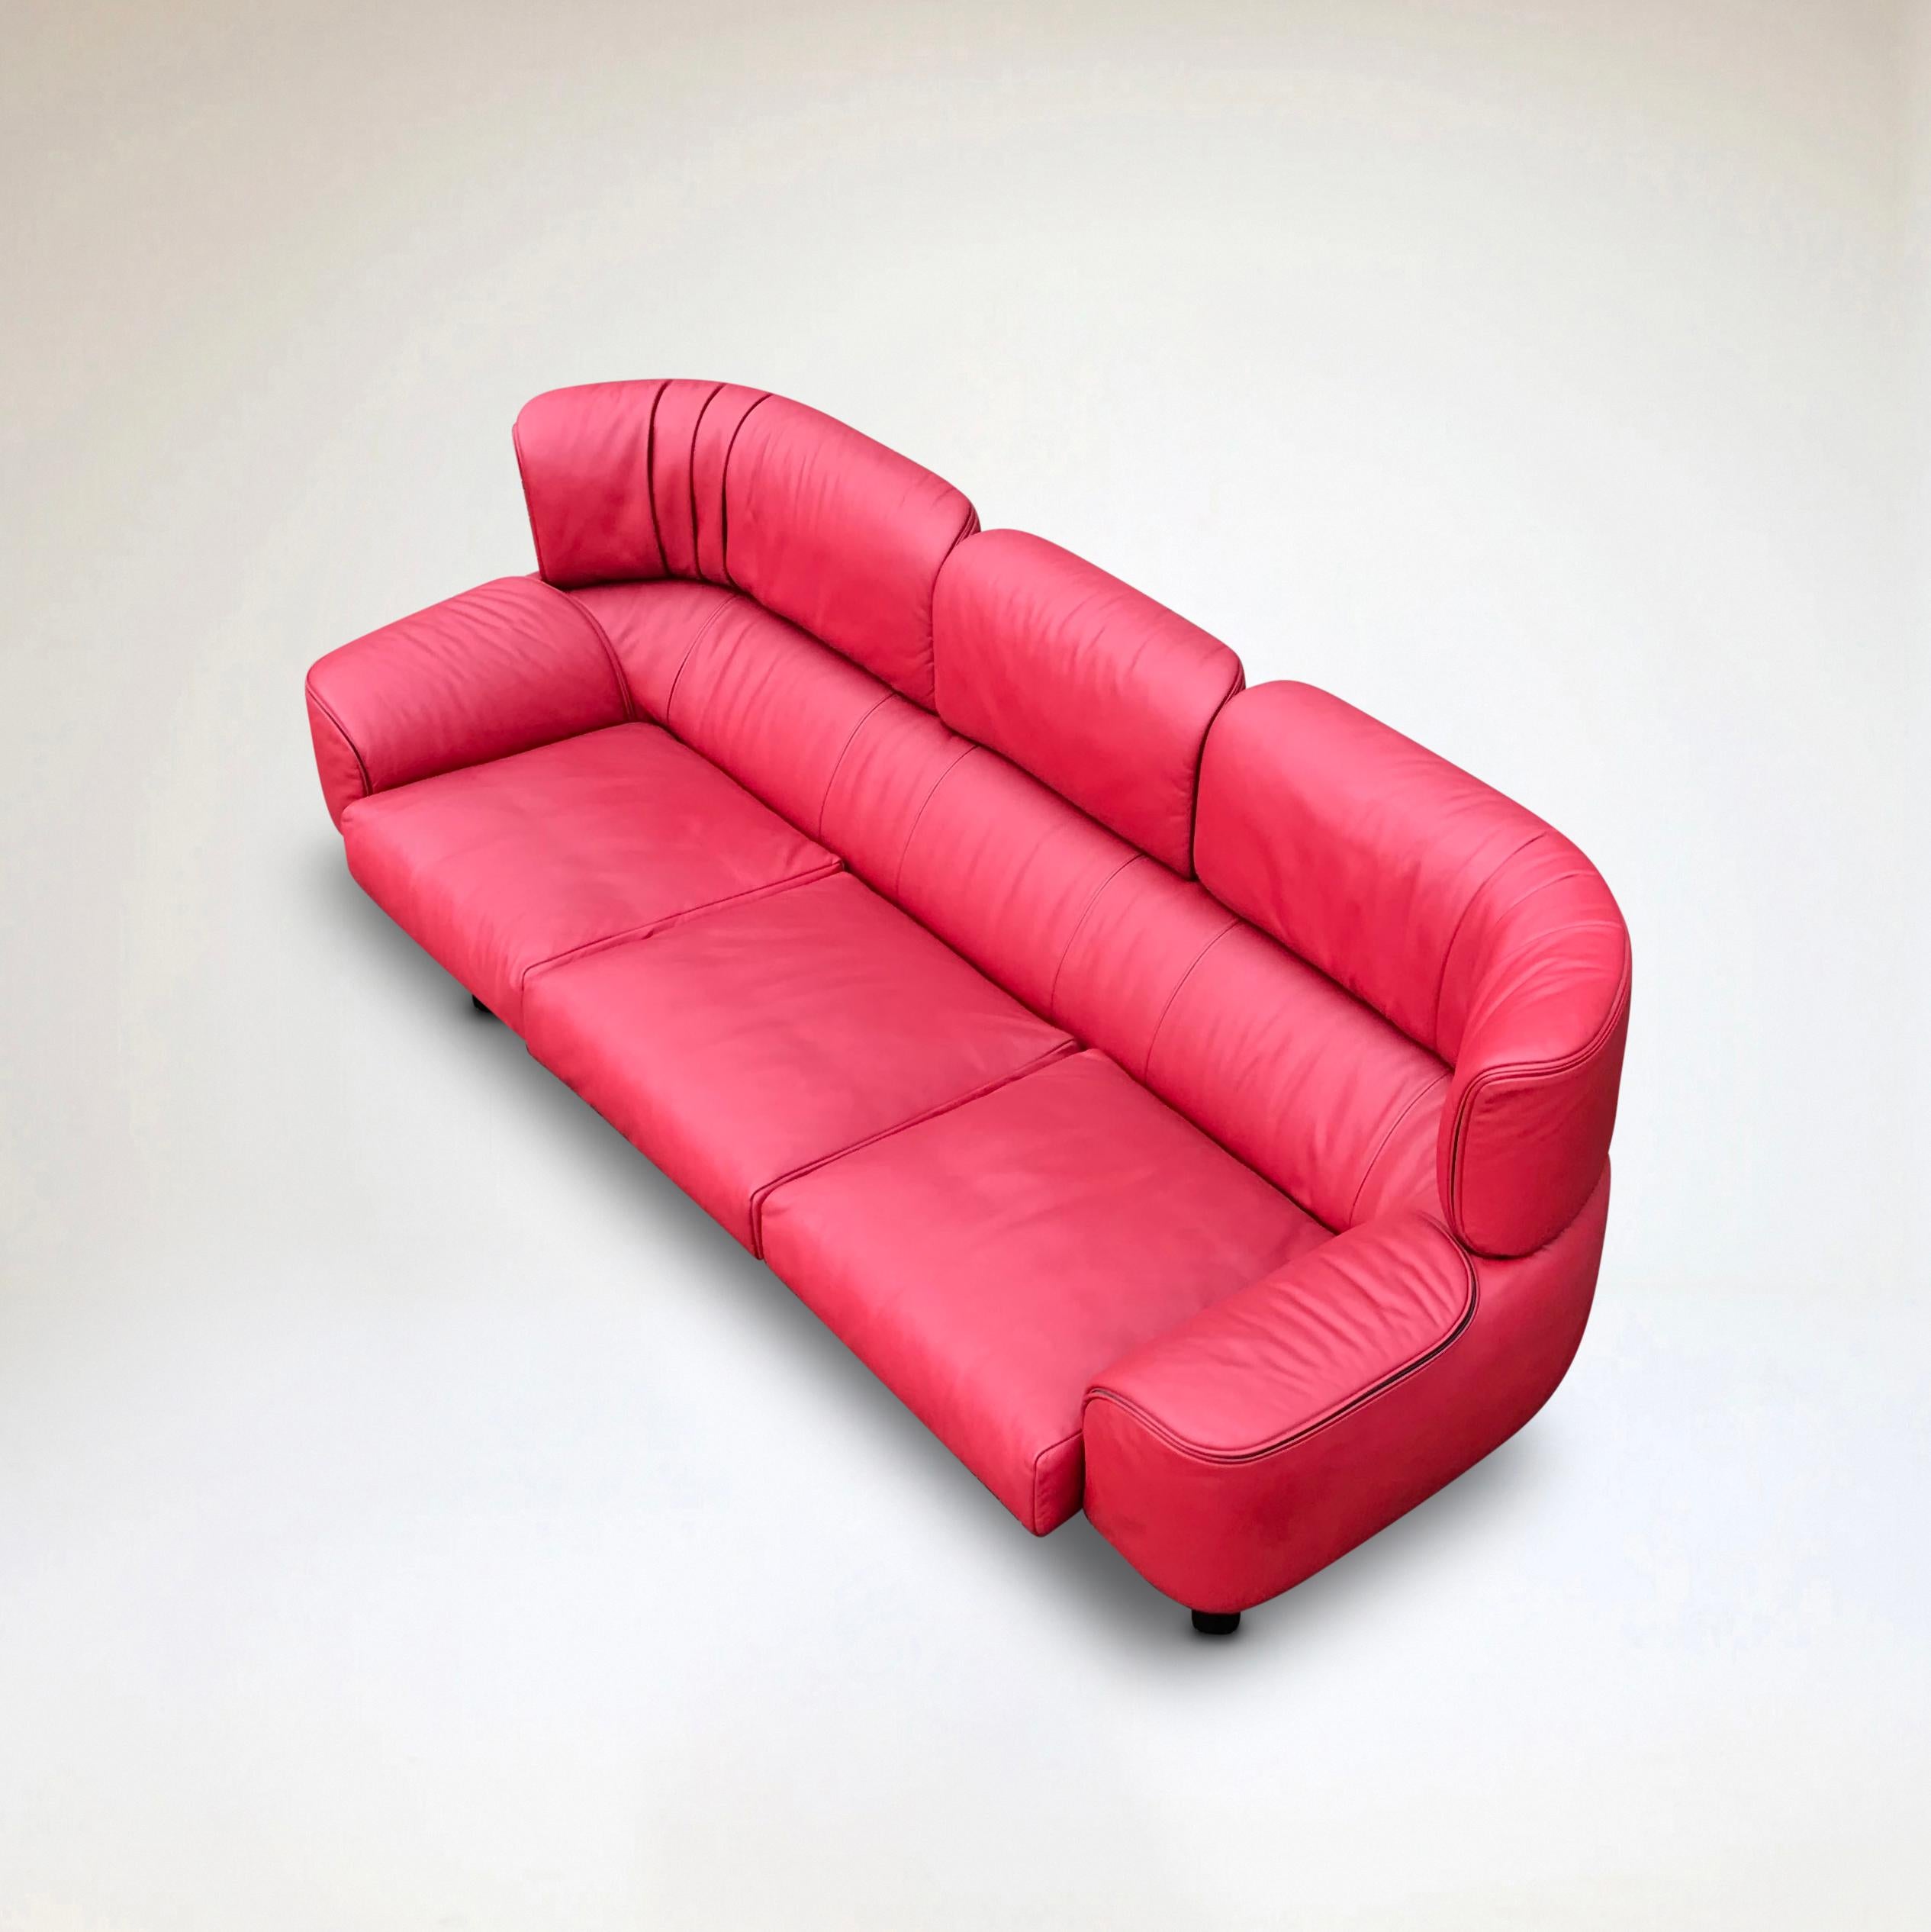 Modern Bull 3-seater red leather sofa by Gianfranco Frattini for Cassina 1987 For Sale